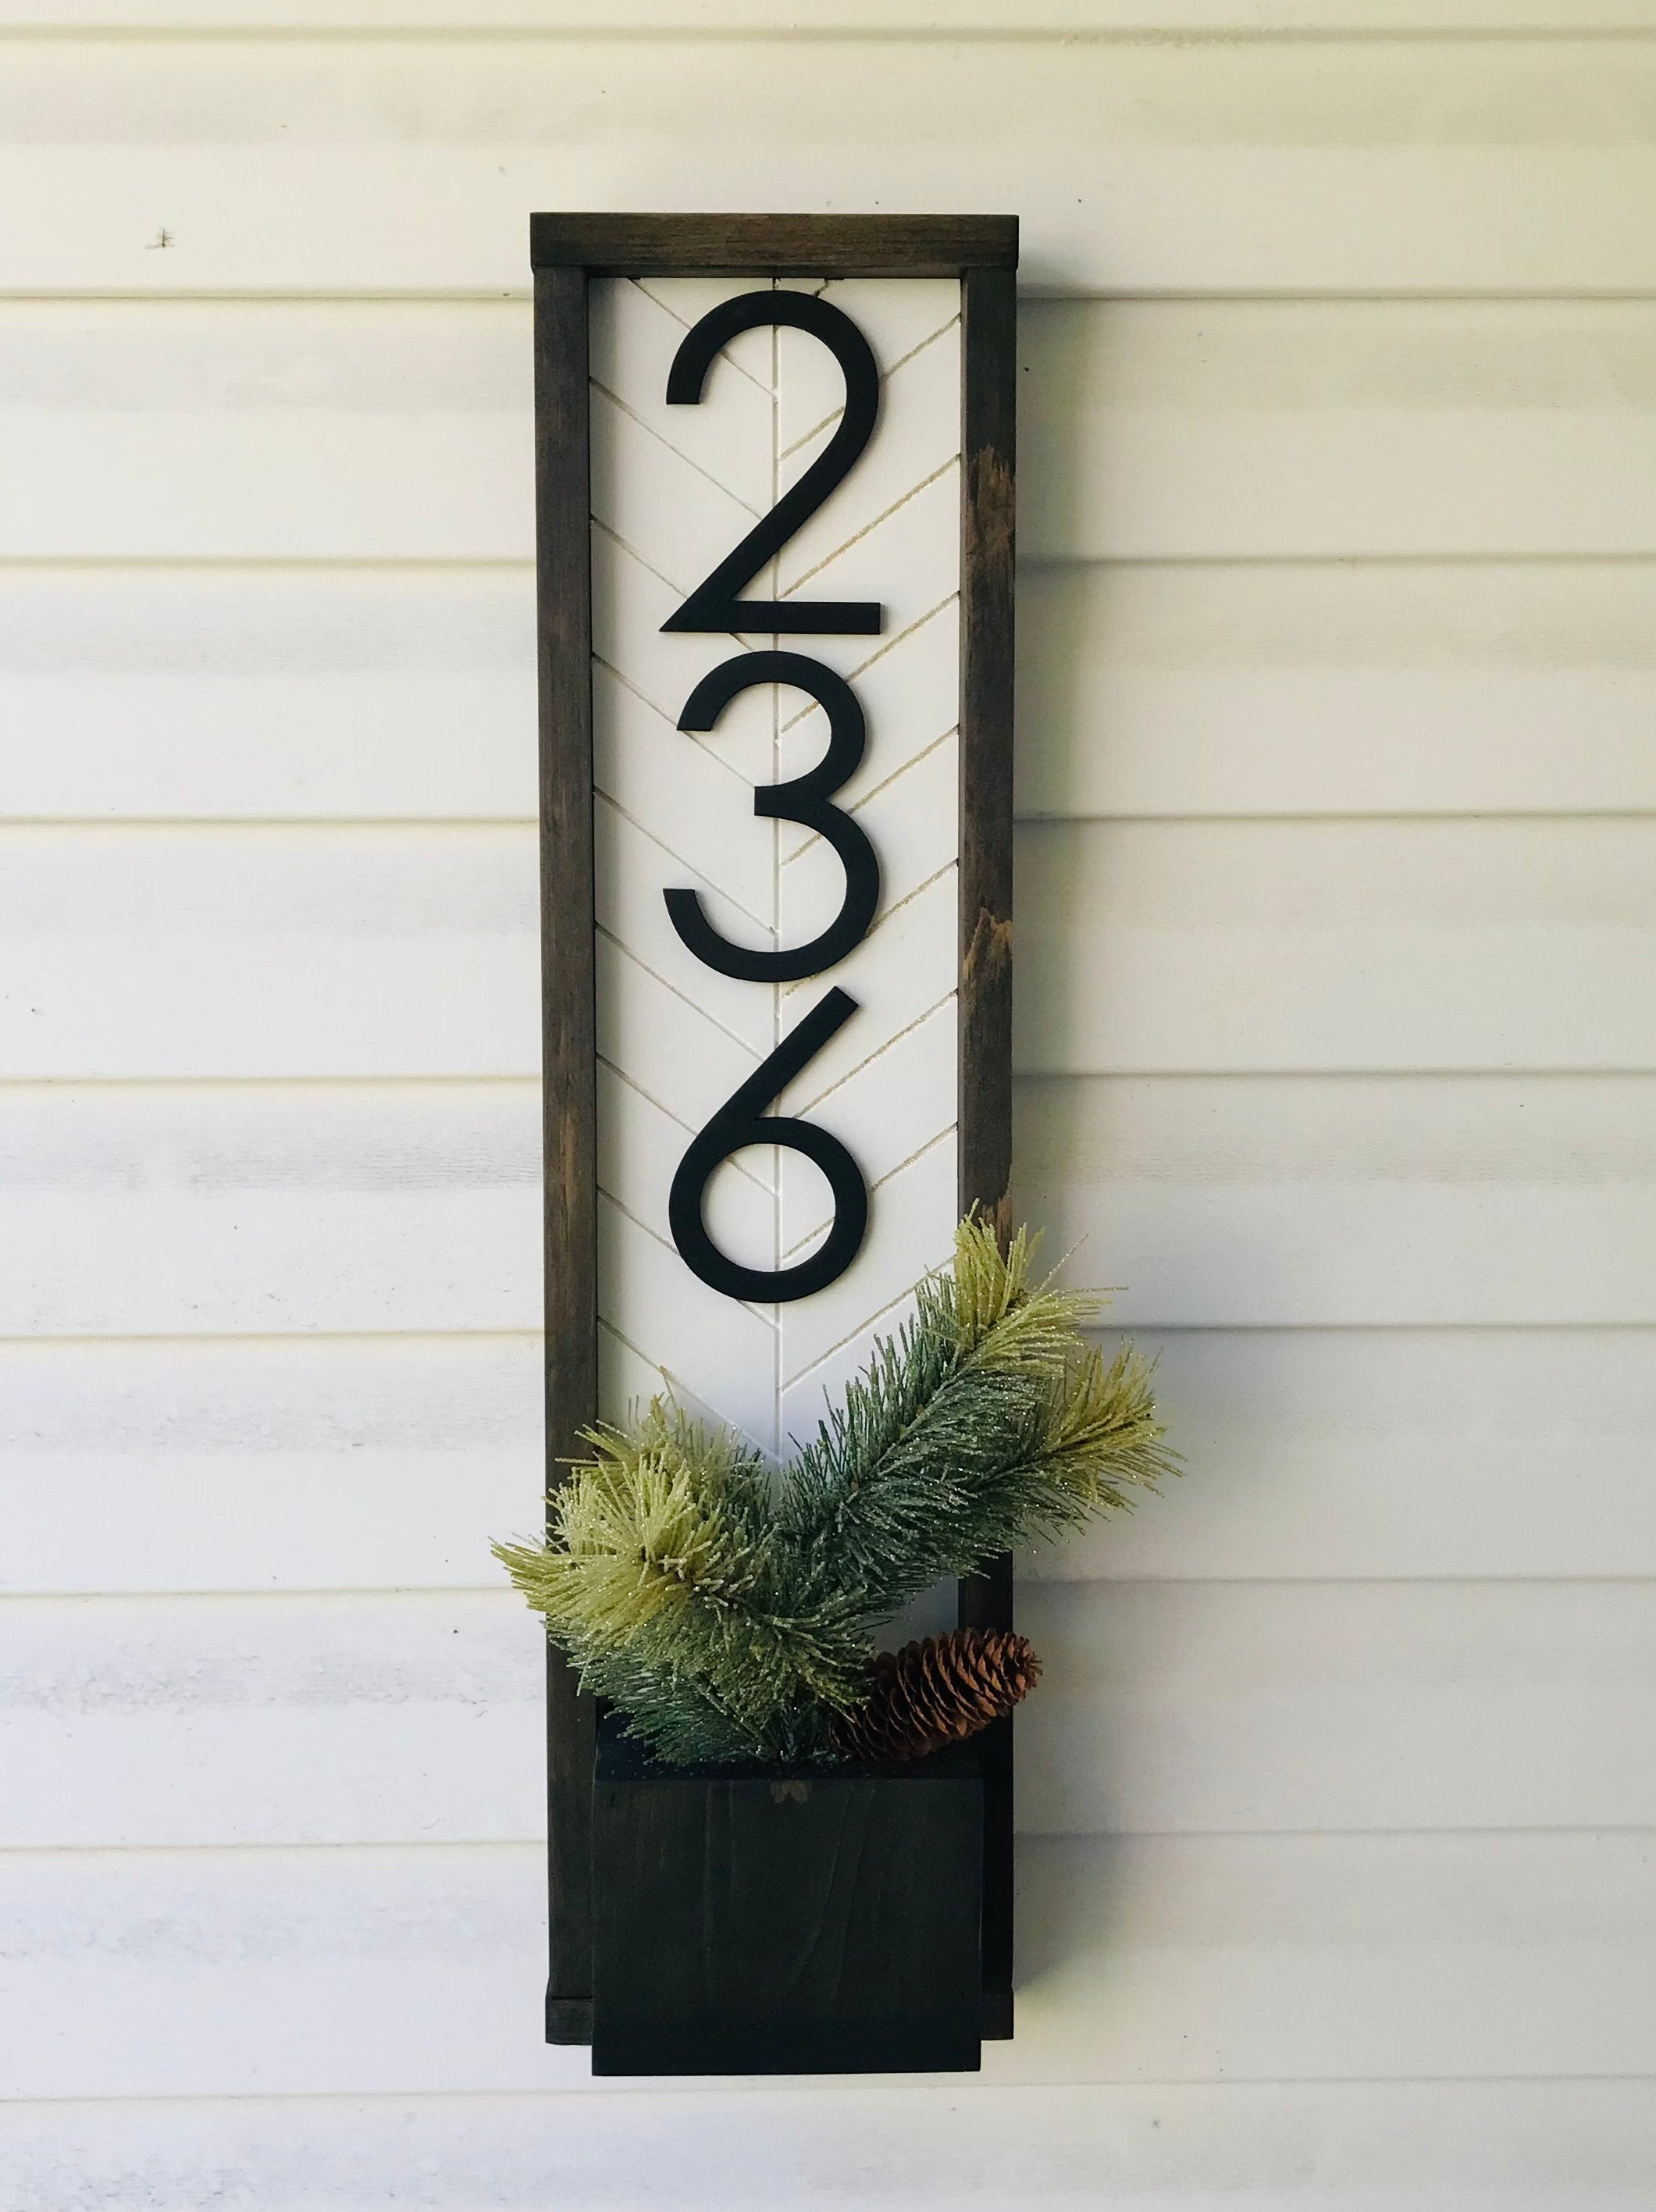 Edgefield Vertical Address Sign Planter with Lighted House Number Sign - Vertical Address Plaque with Solar Powered LED Light - Personalized